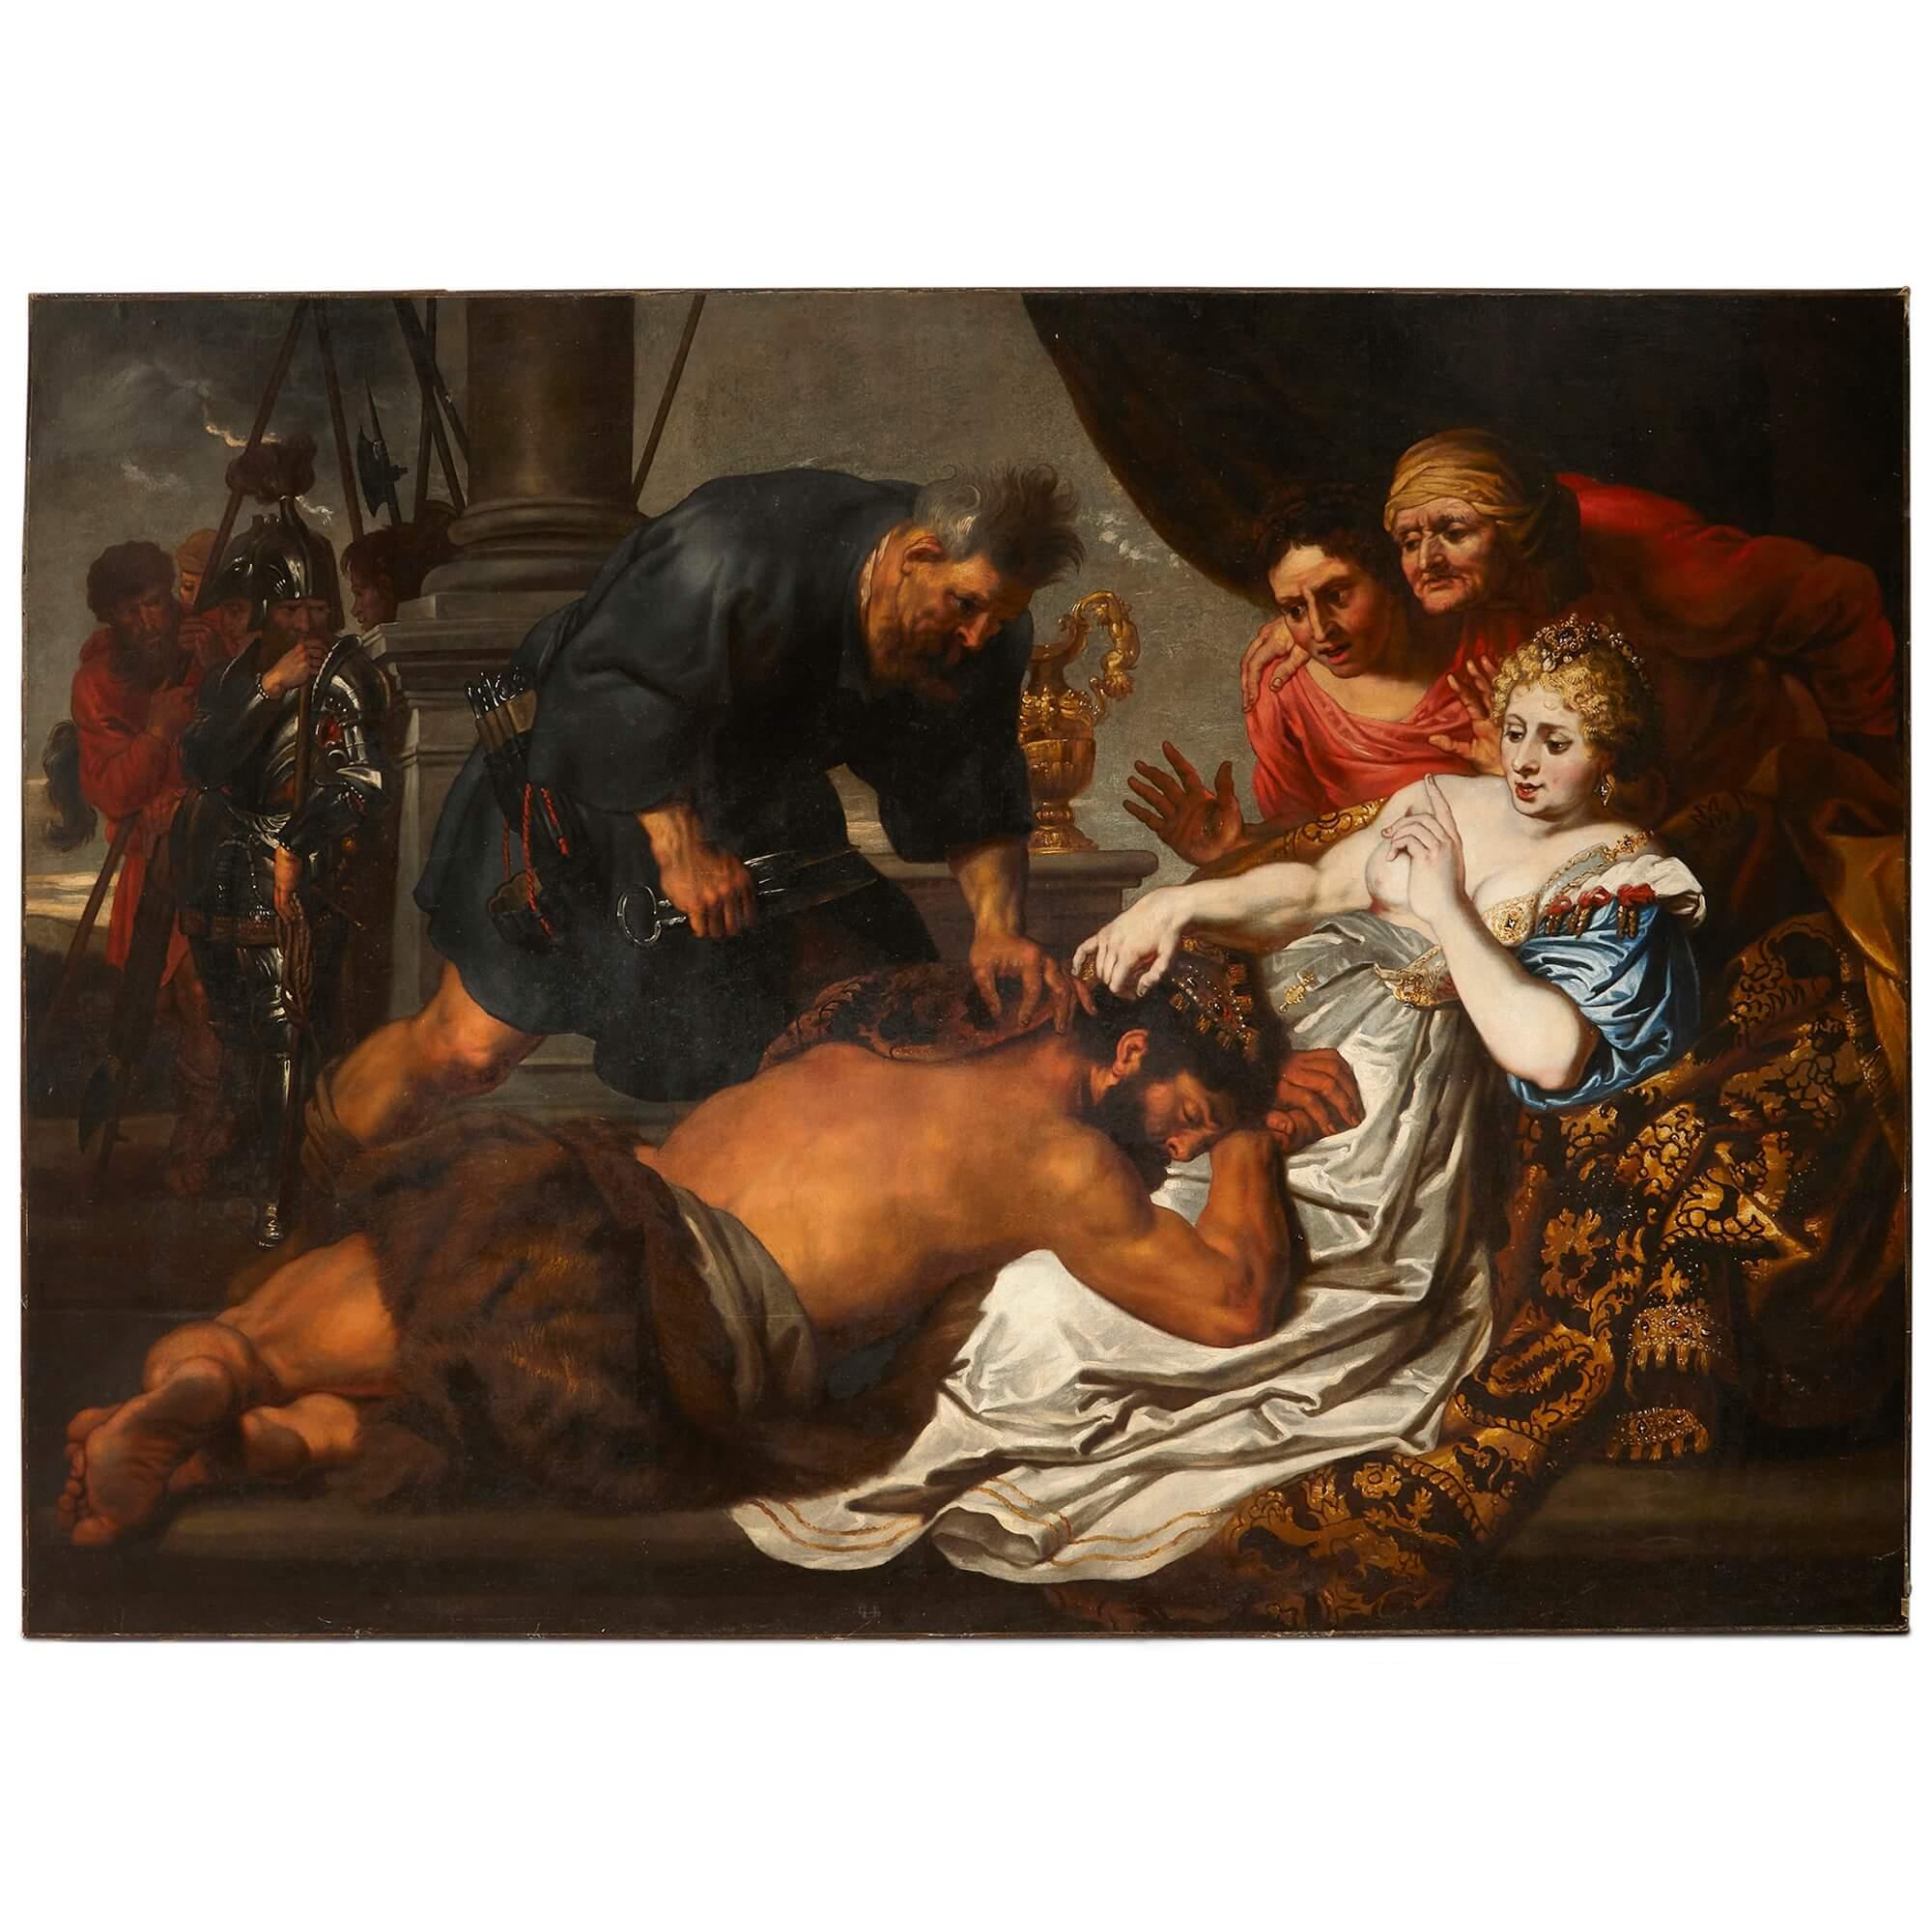 Anthony Van Dyck Figurative Painting - Large Antique Oil Painting of Samson and Delilah after Anthony van Dyck